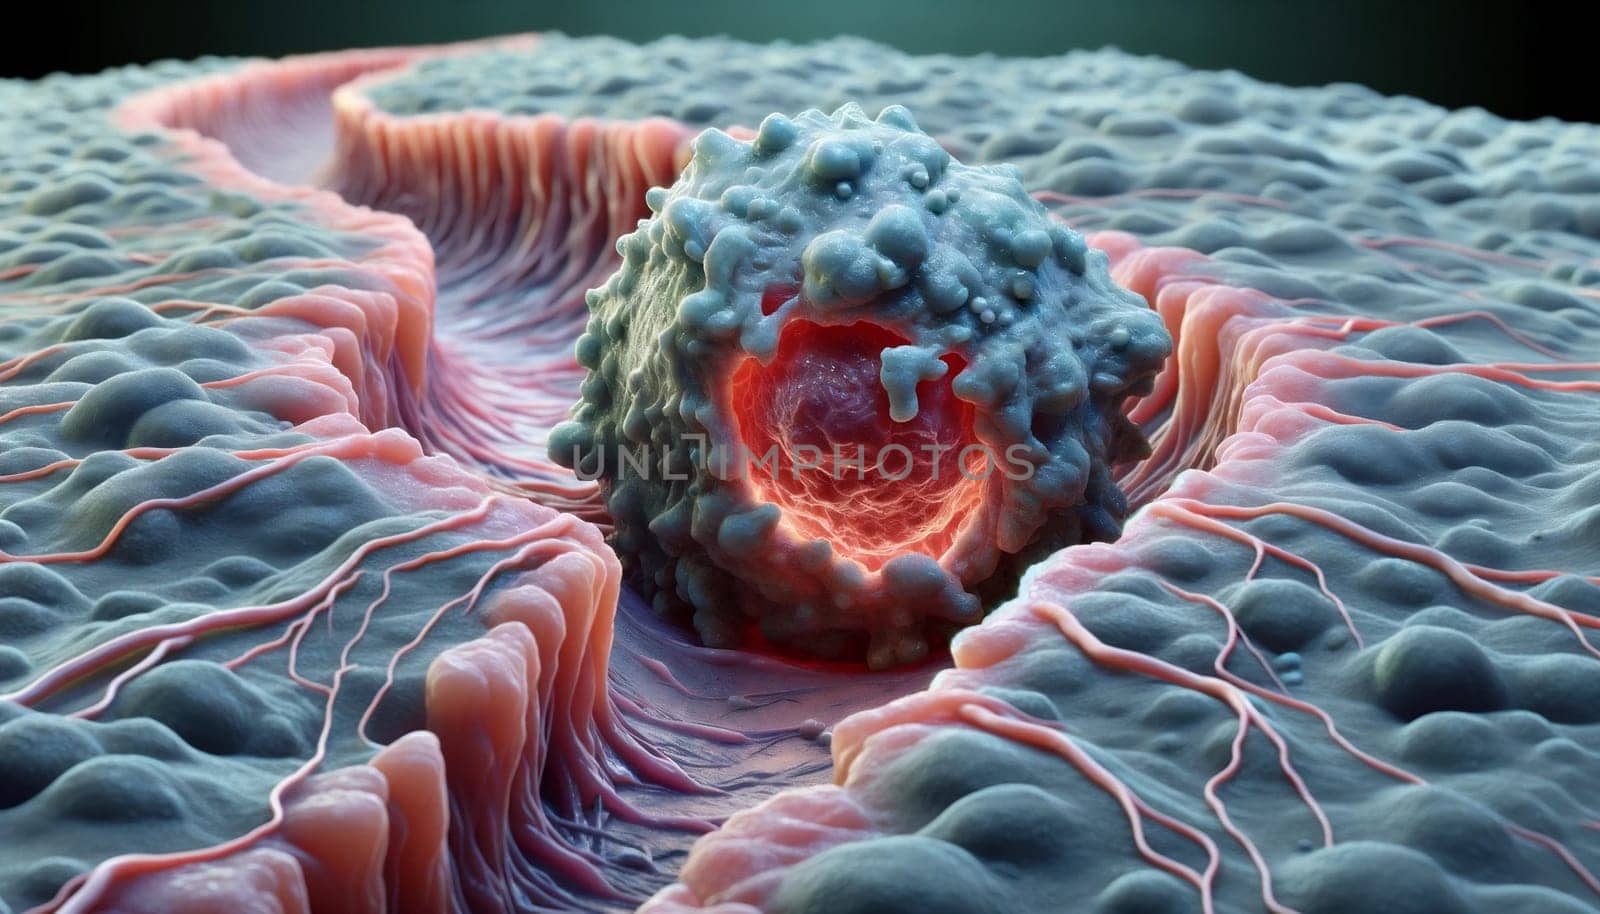 The Infiltration of a Cancer Cell into Surrounding Tissue – A Detailed Depiction Generated by AI by Crevis